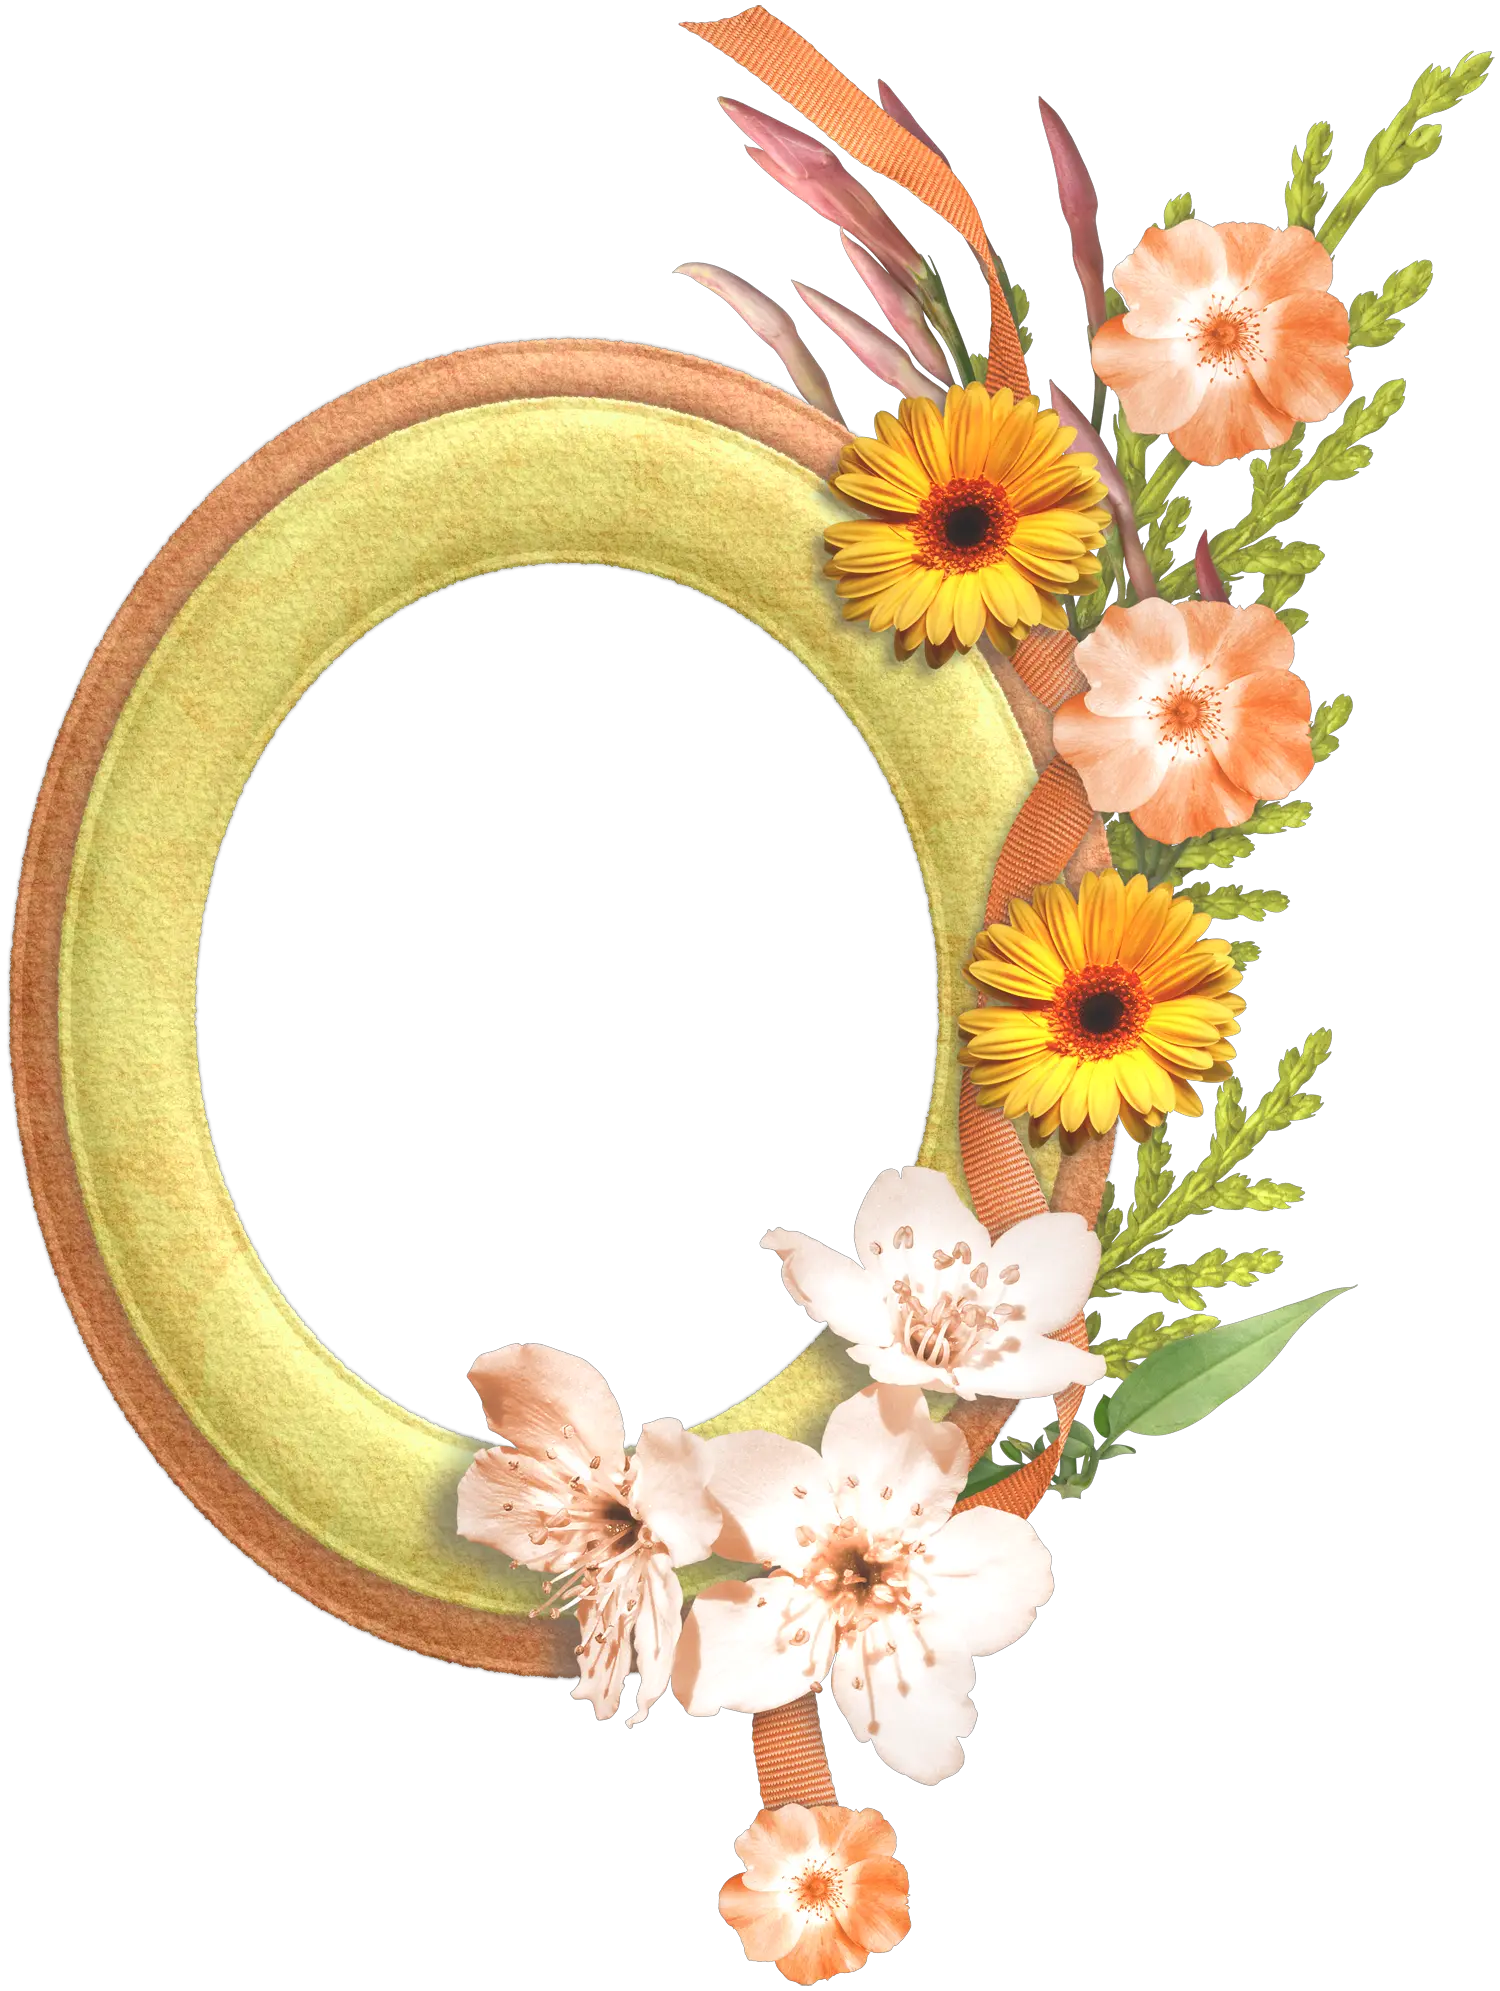 Download Flower Oval Frame Png Image With No Background Funeral Frames For Flowers Oval Frame Png